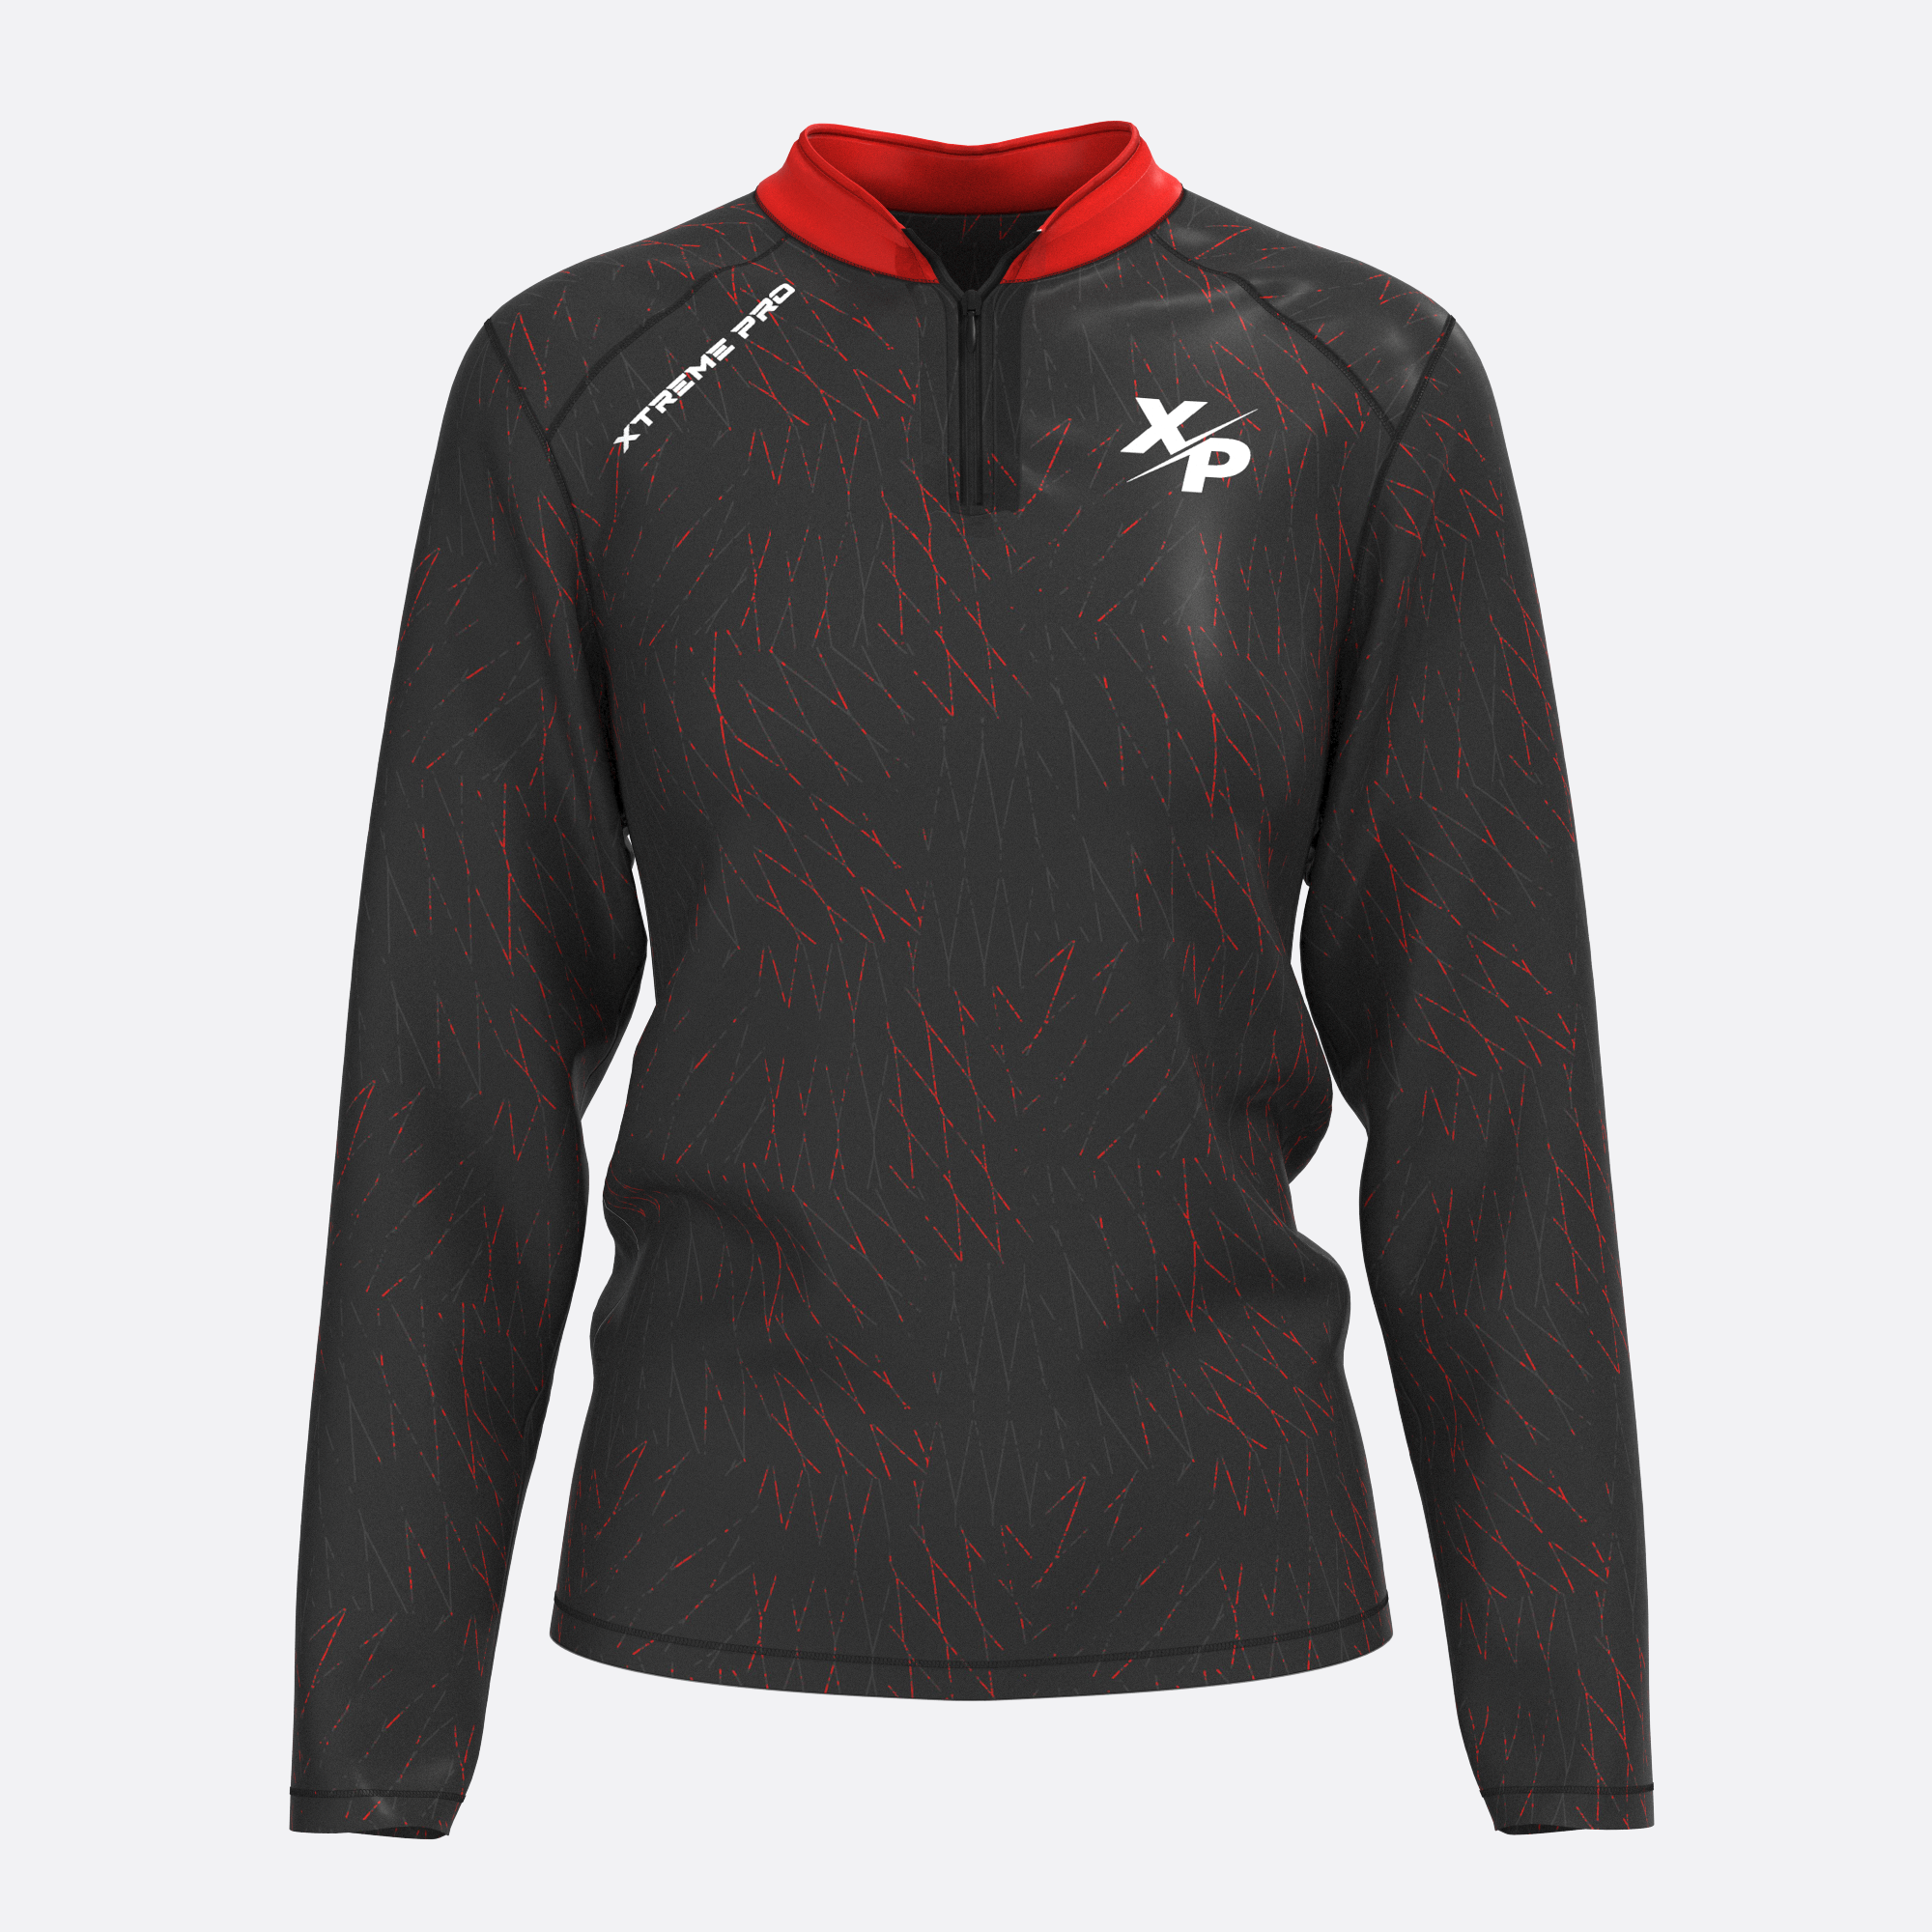 Caged Quarter Zip Jacket in Red Xtreme Pro Apparel